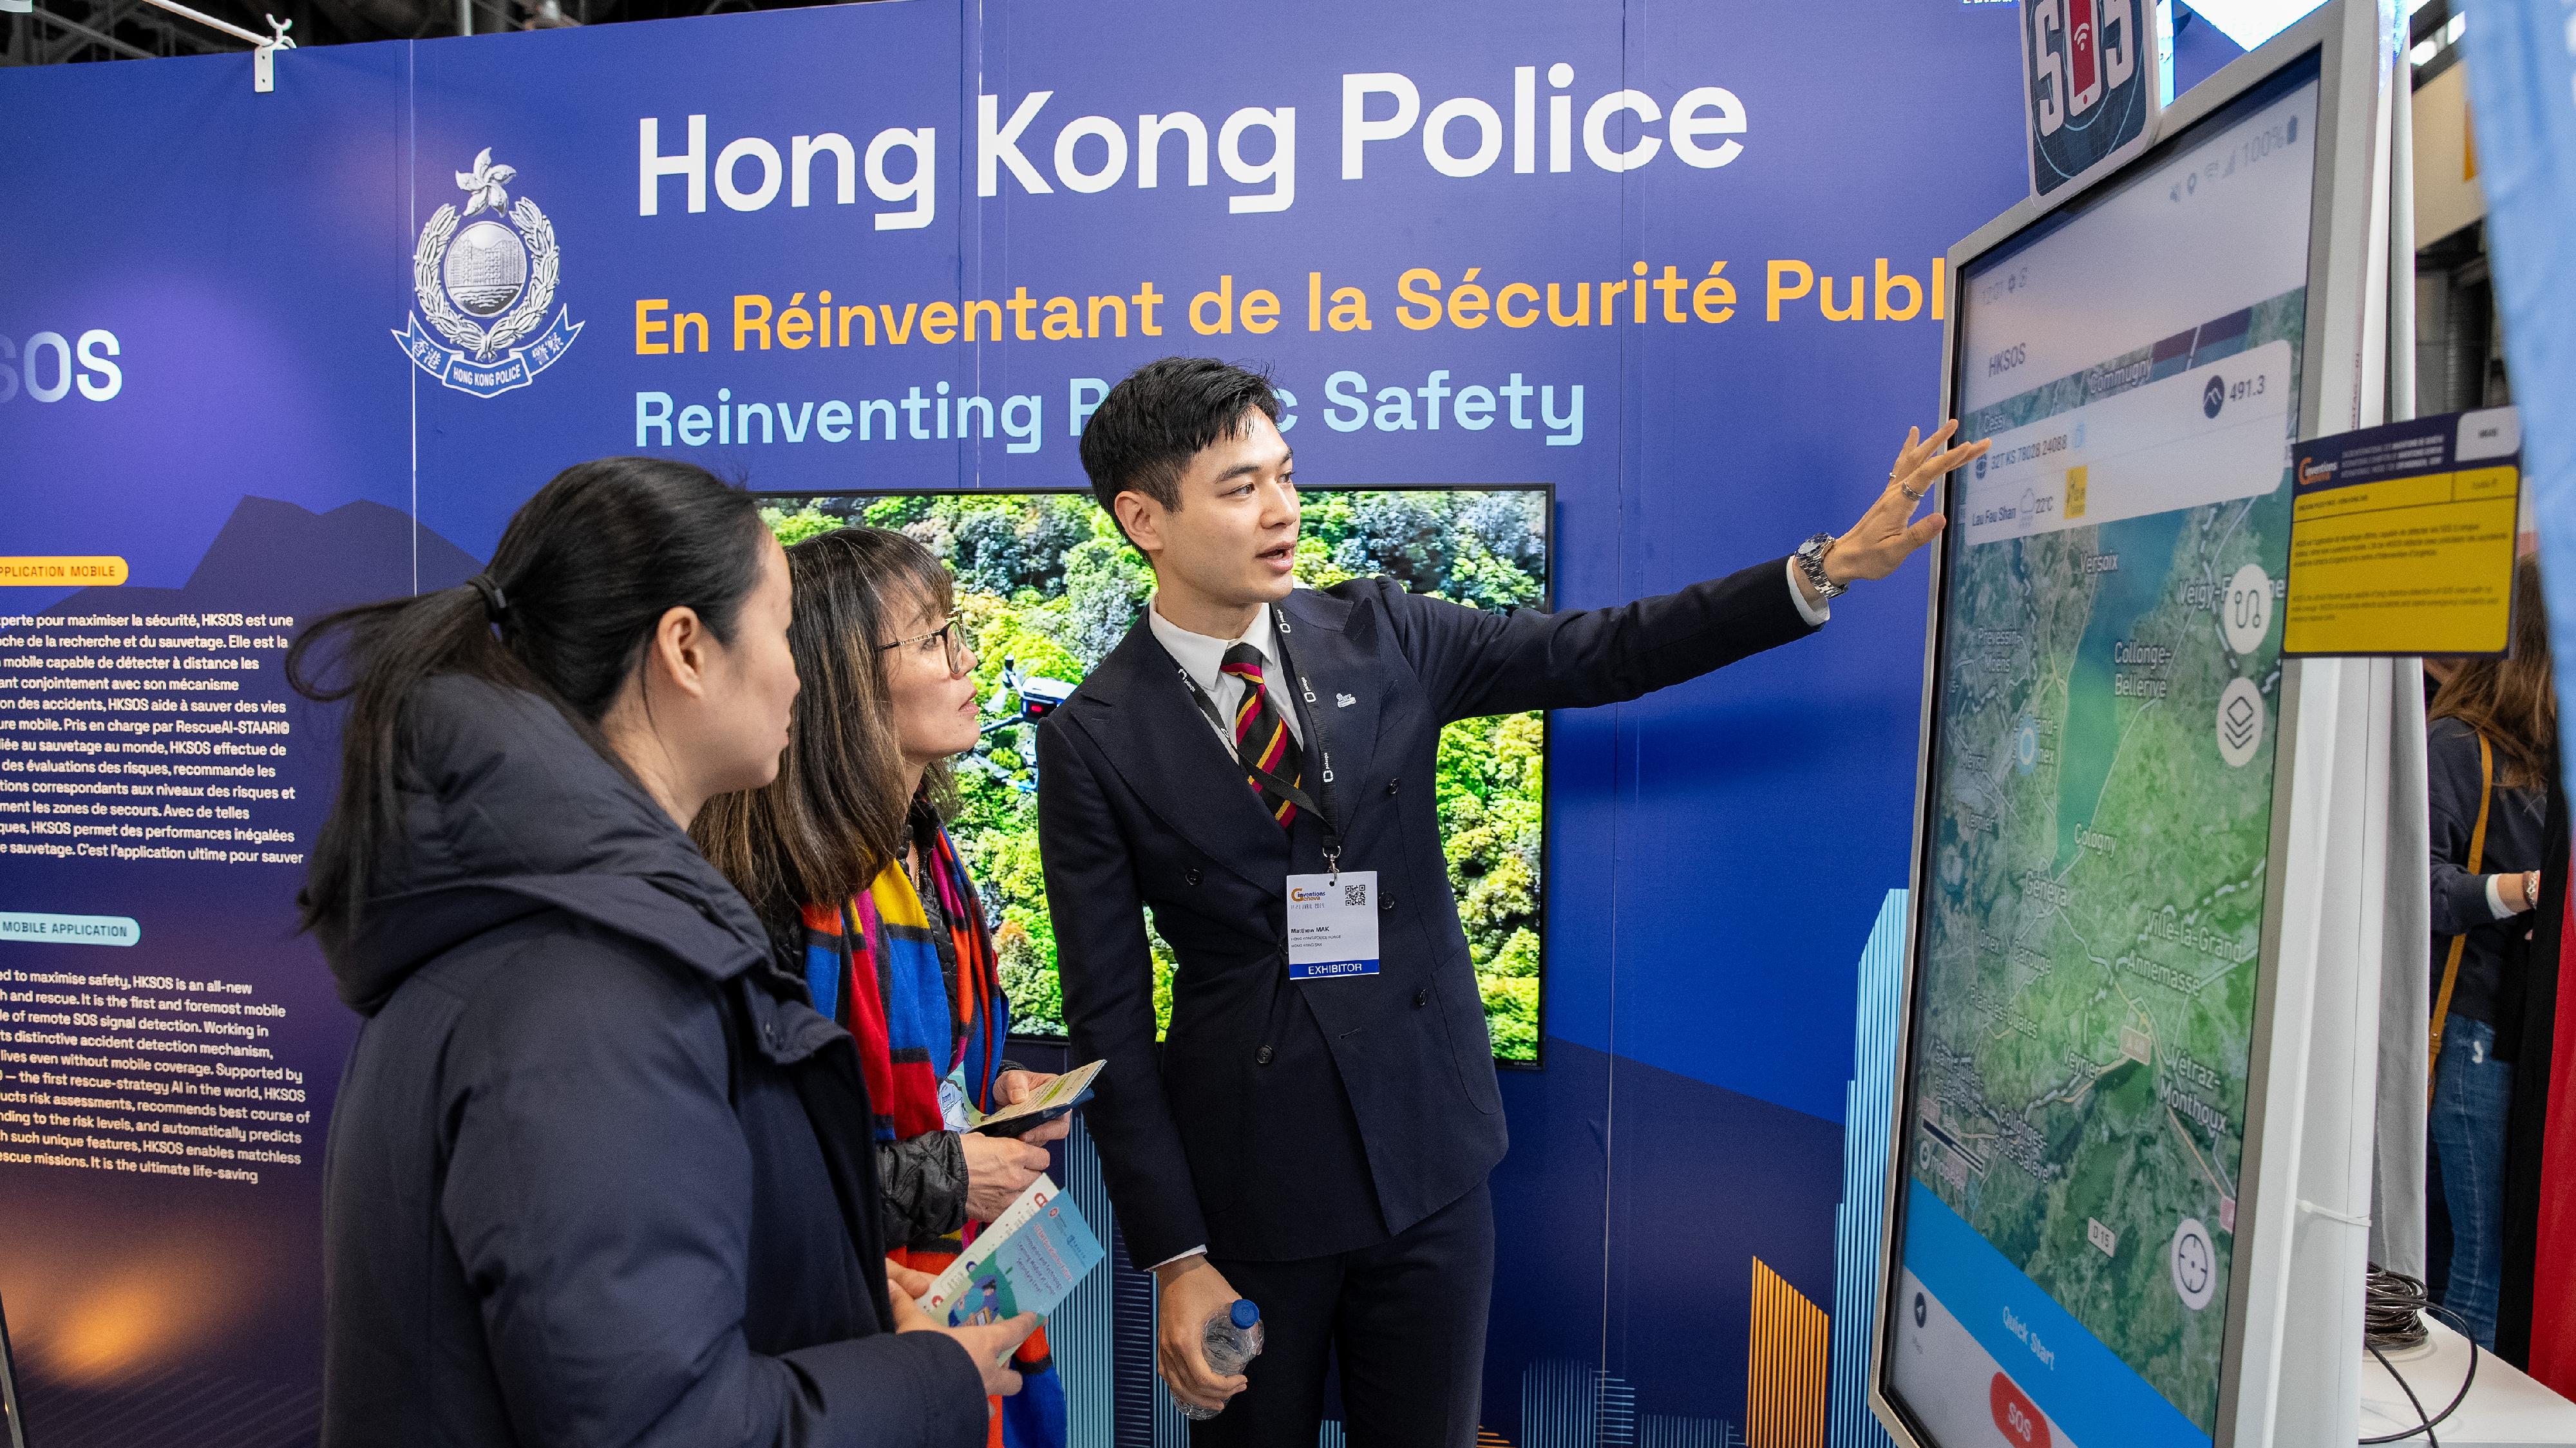 Officers of the Information Systems Wing of the Hong Kong Police Force participated in 49th International Exhibition of Inventions of Geneva, which was held between April 17 and 21 in Geneva, Switzerland. Photo shows one of the winning entries HKSOS Mobile Application, which safeguards citizens’ lives with the new automatic and dynamic risk assessments and prediction function. 